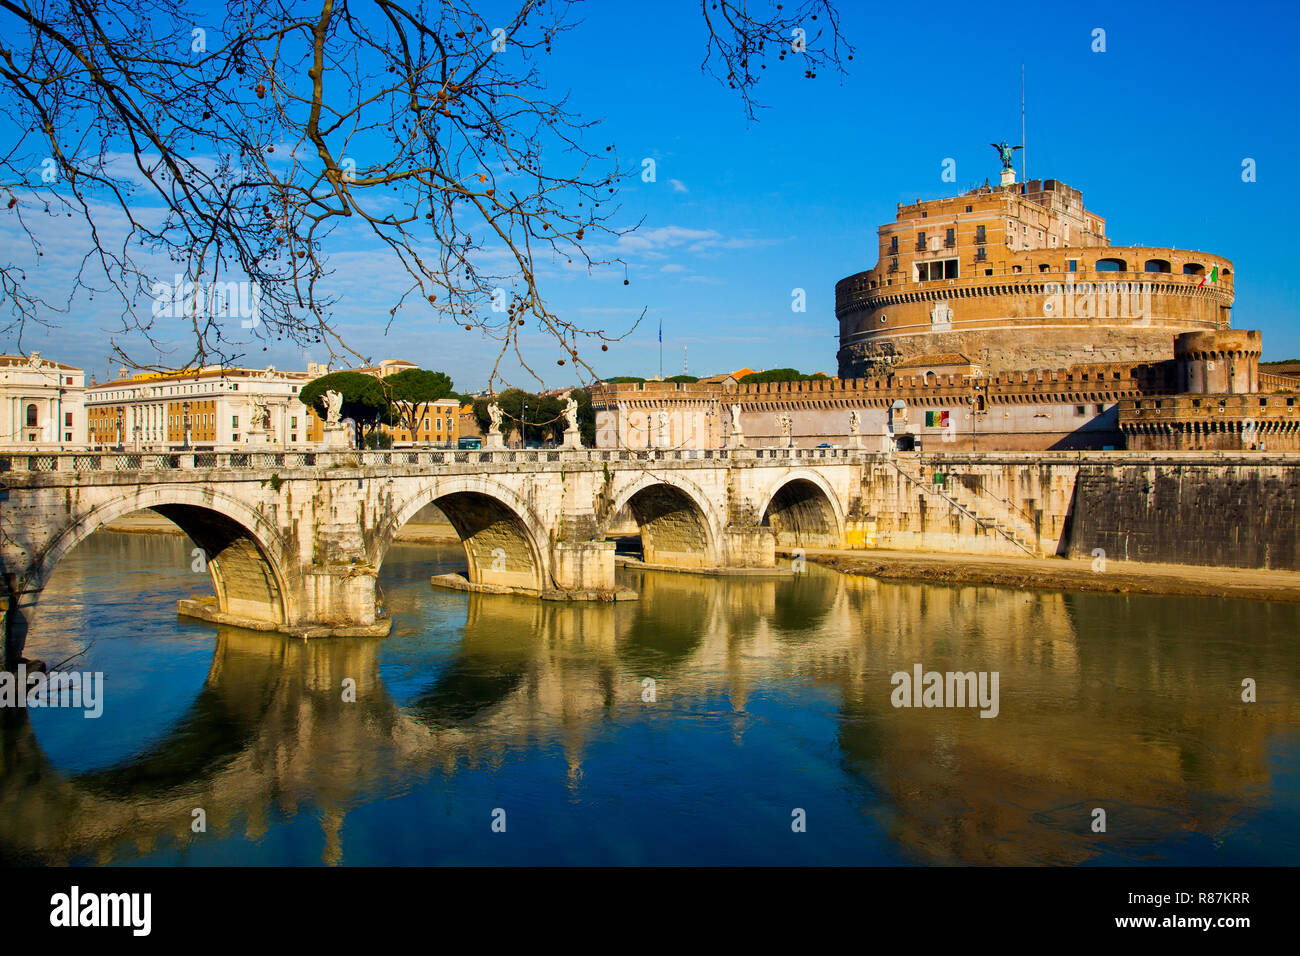 Looking across the Tiber River towards Ponte Sant'Angelo and Castel Sant'Angelo in the Vatican. Stock Photo